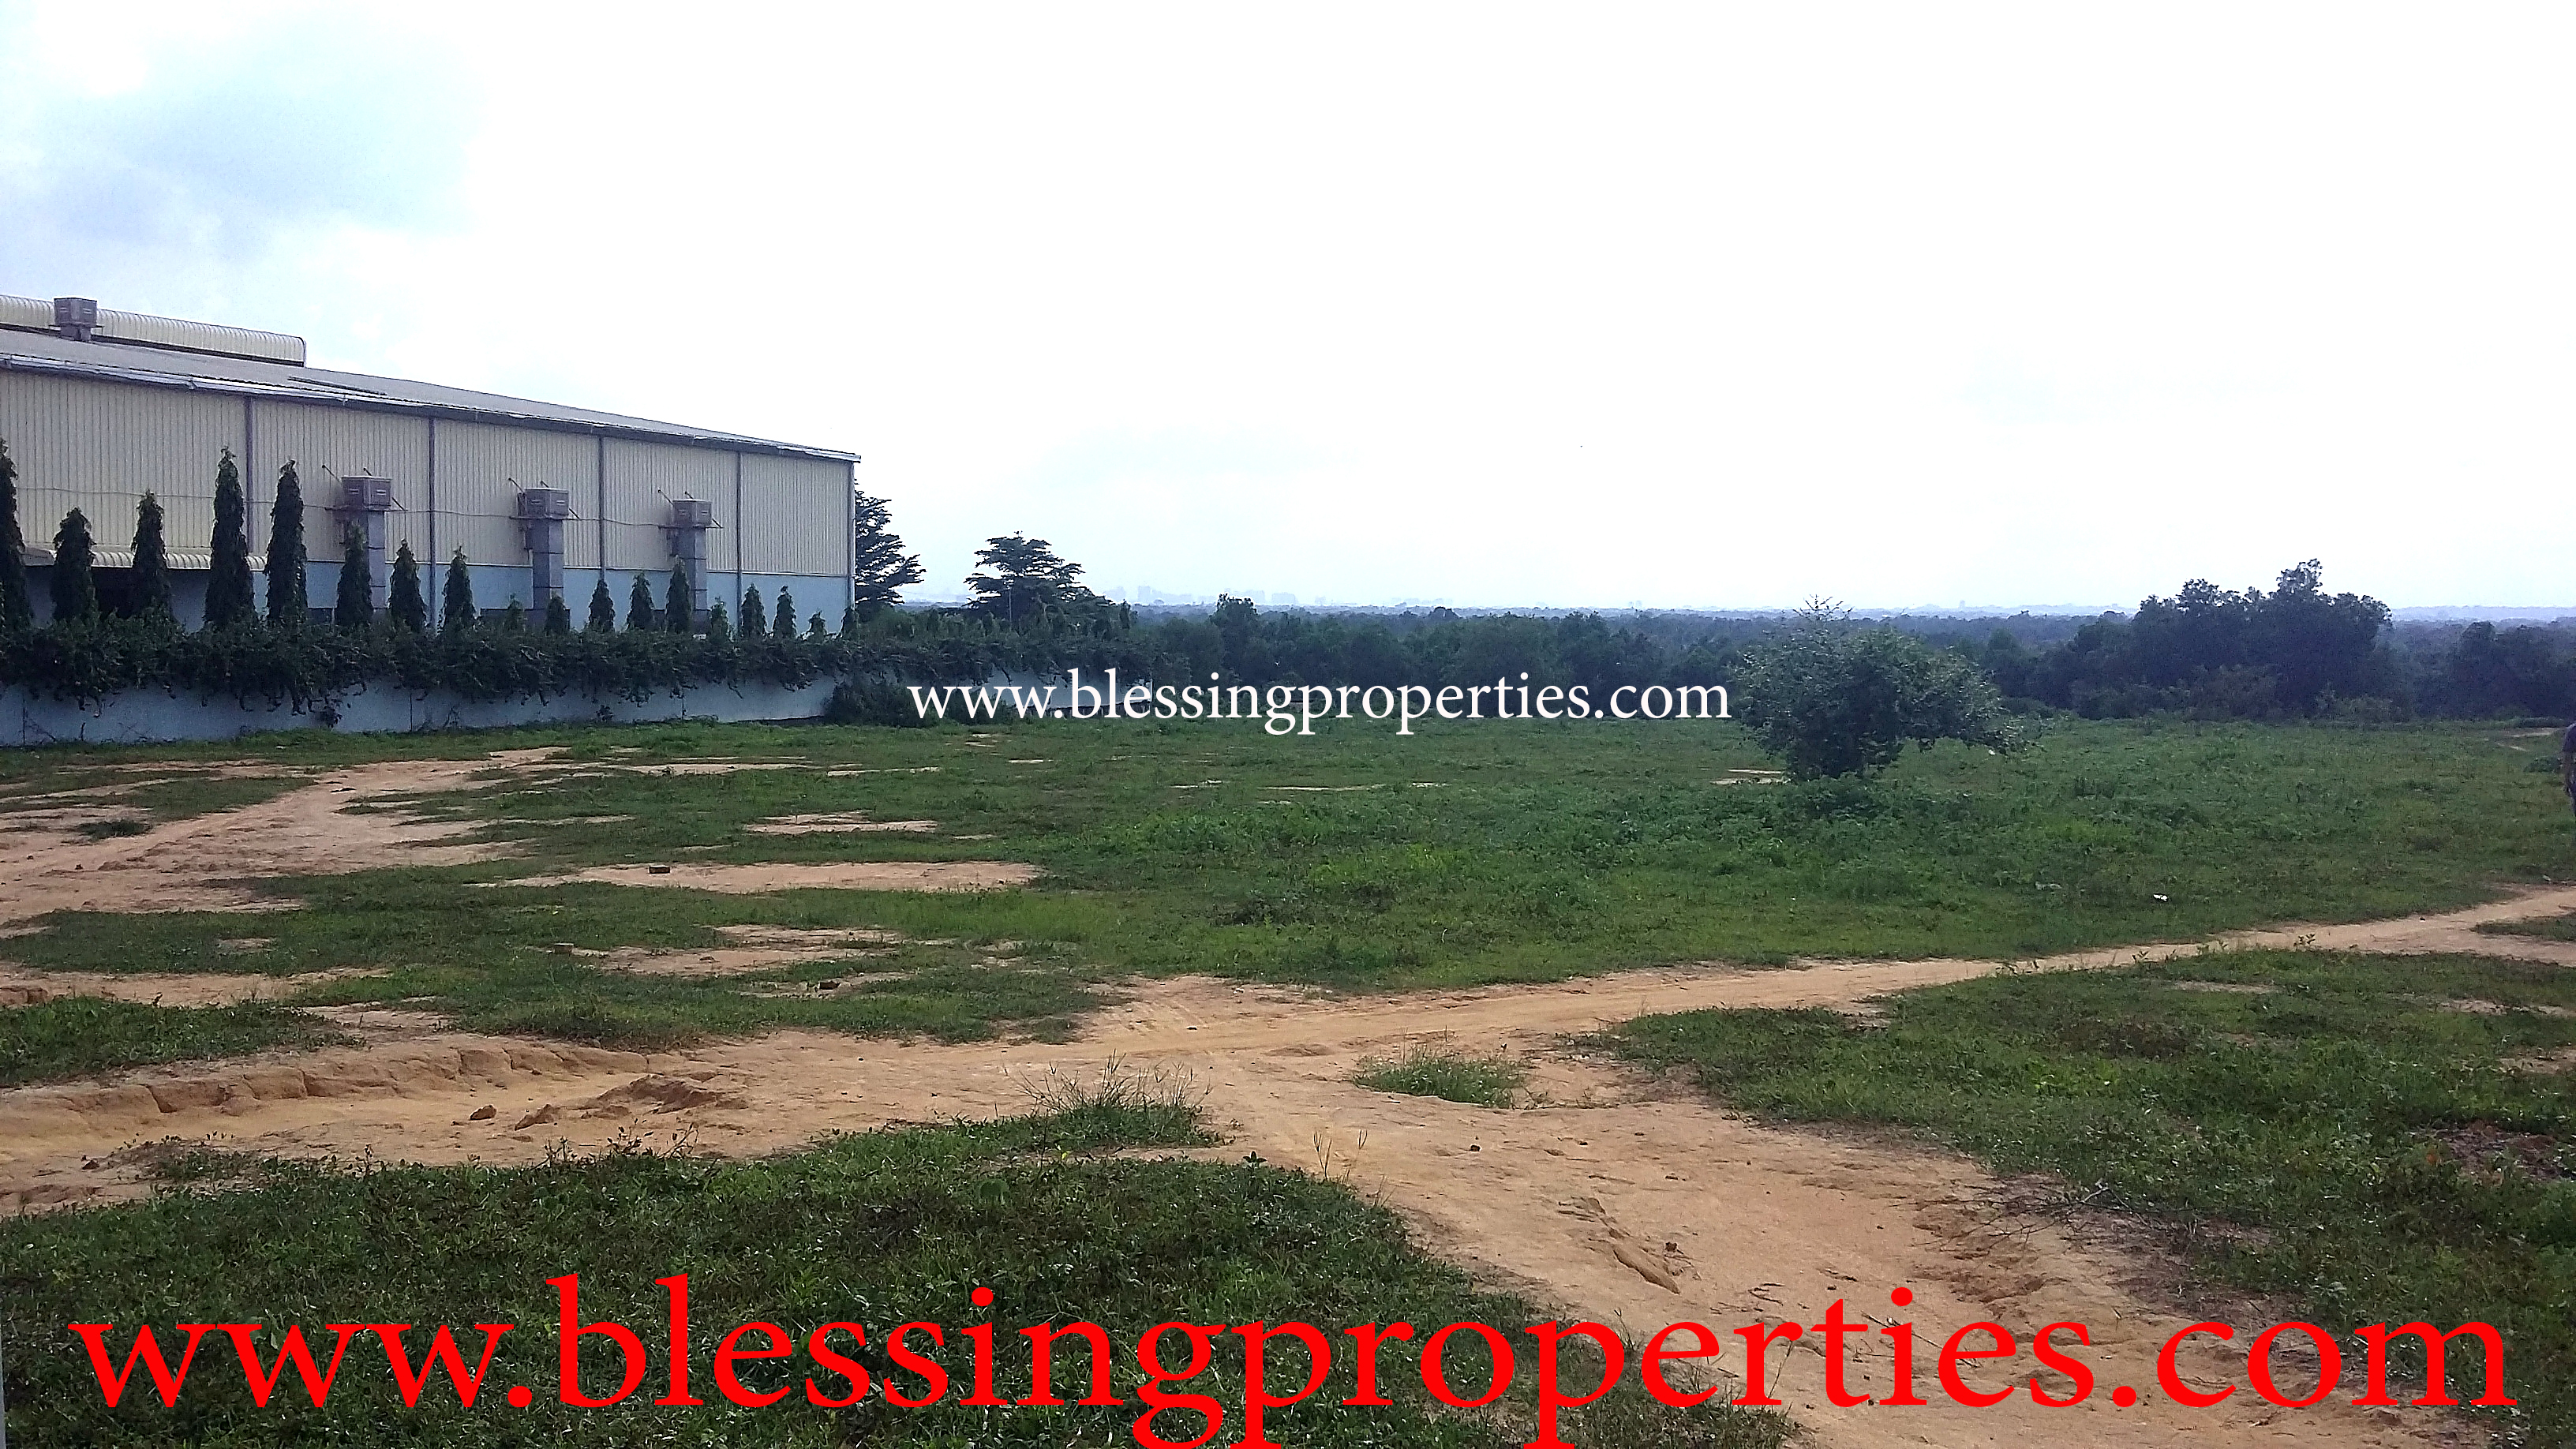 Small Piece Of Industrial Land For Sale inside Industrial Park